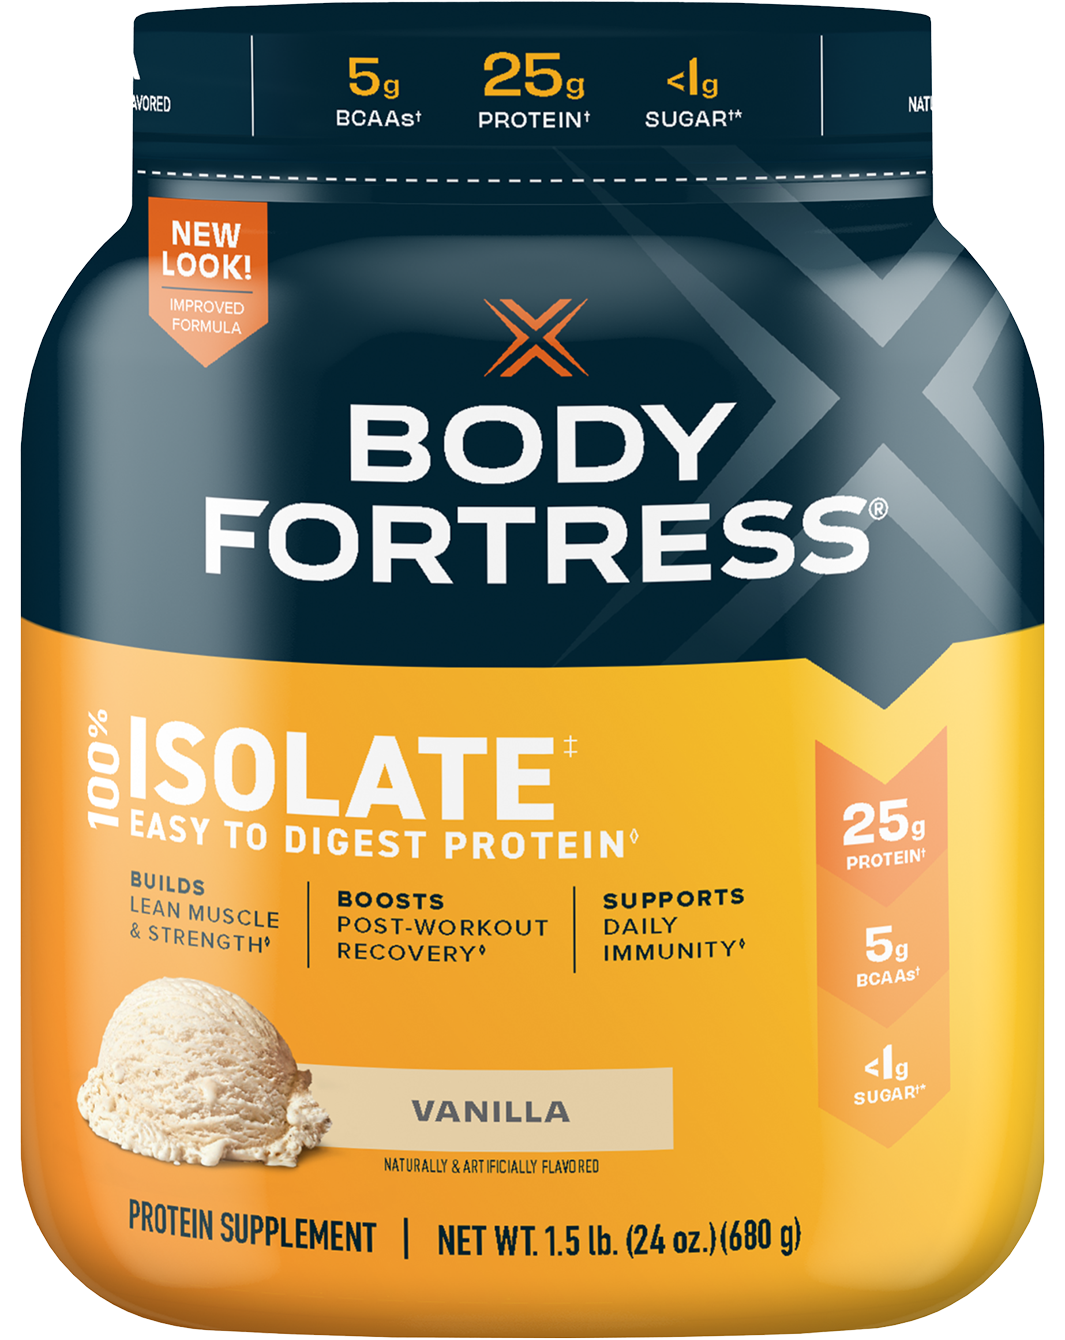 100% Isolate, Easy to Digest Protein Powder, Vanilla